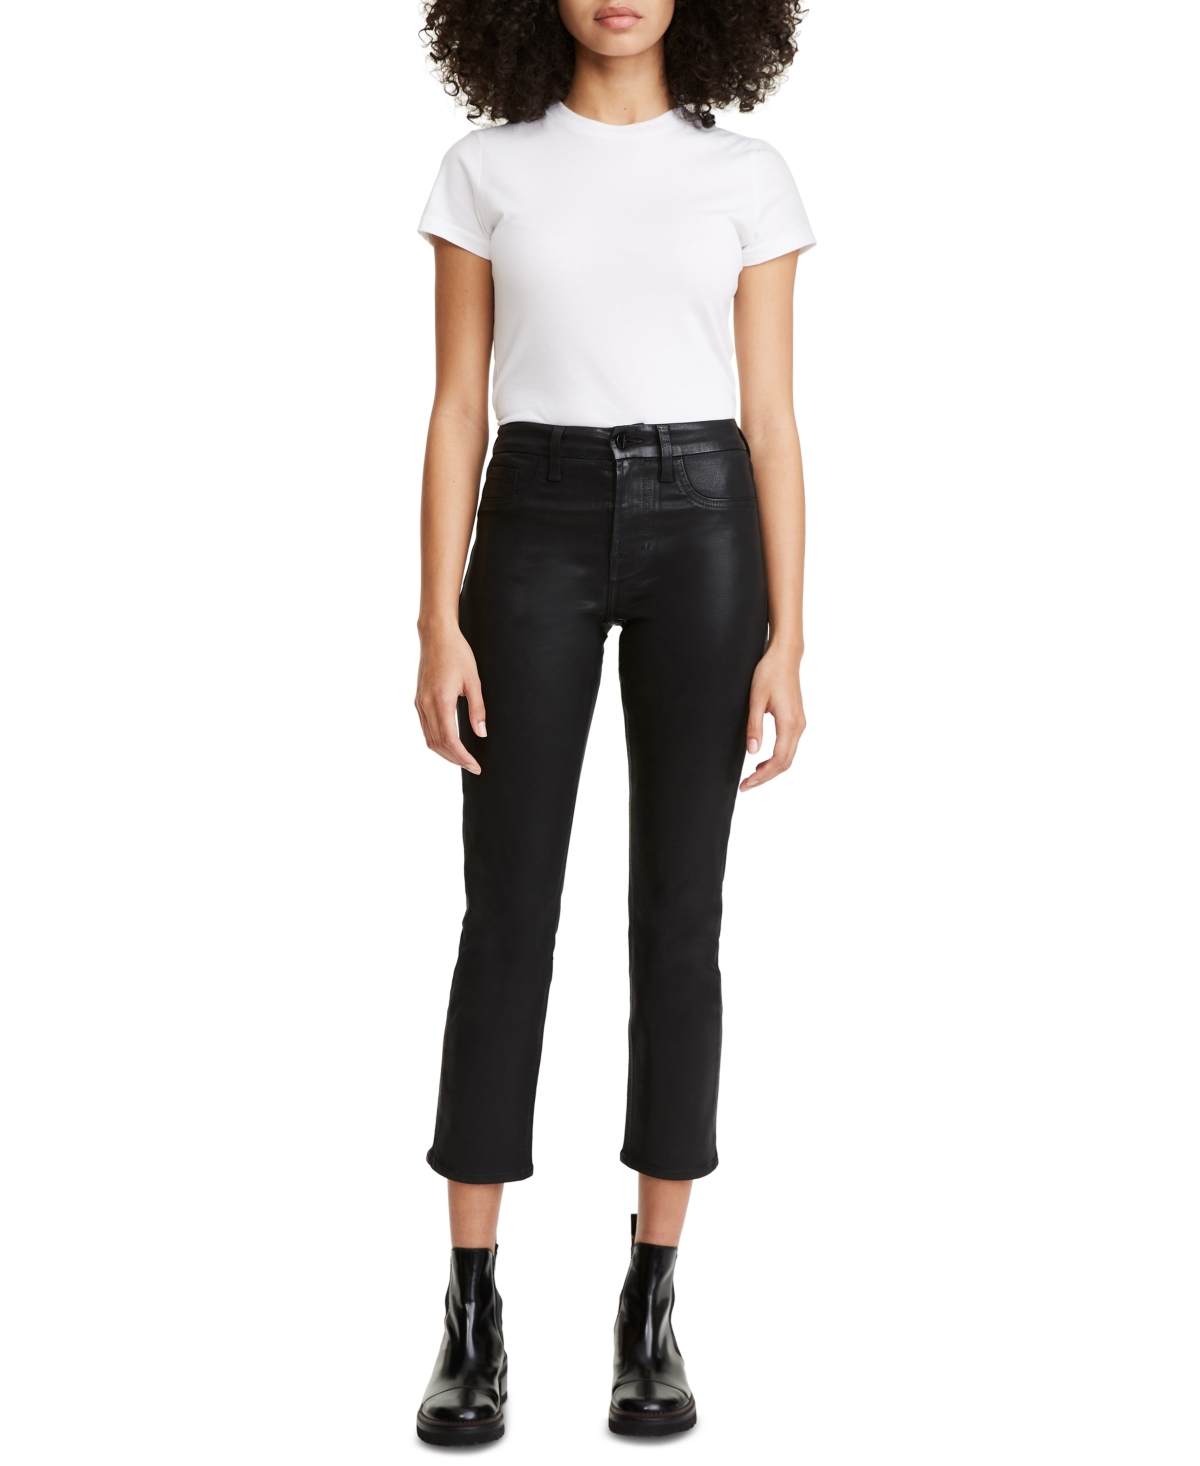  JEN7 by 7 For All Mankind Coated Straight-Fit Ankle Jeans